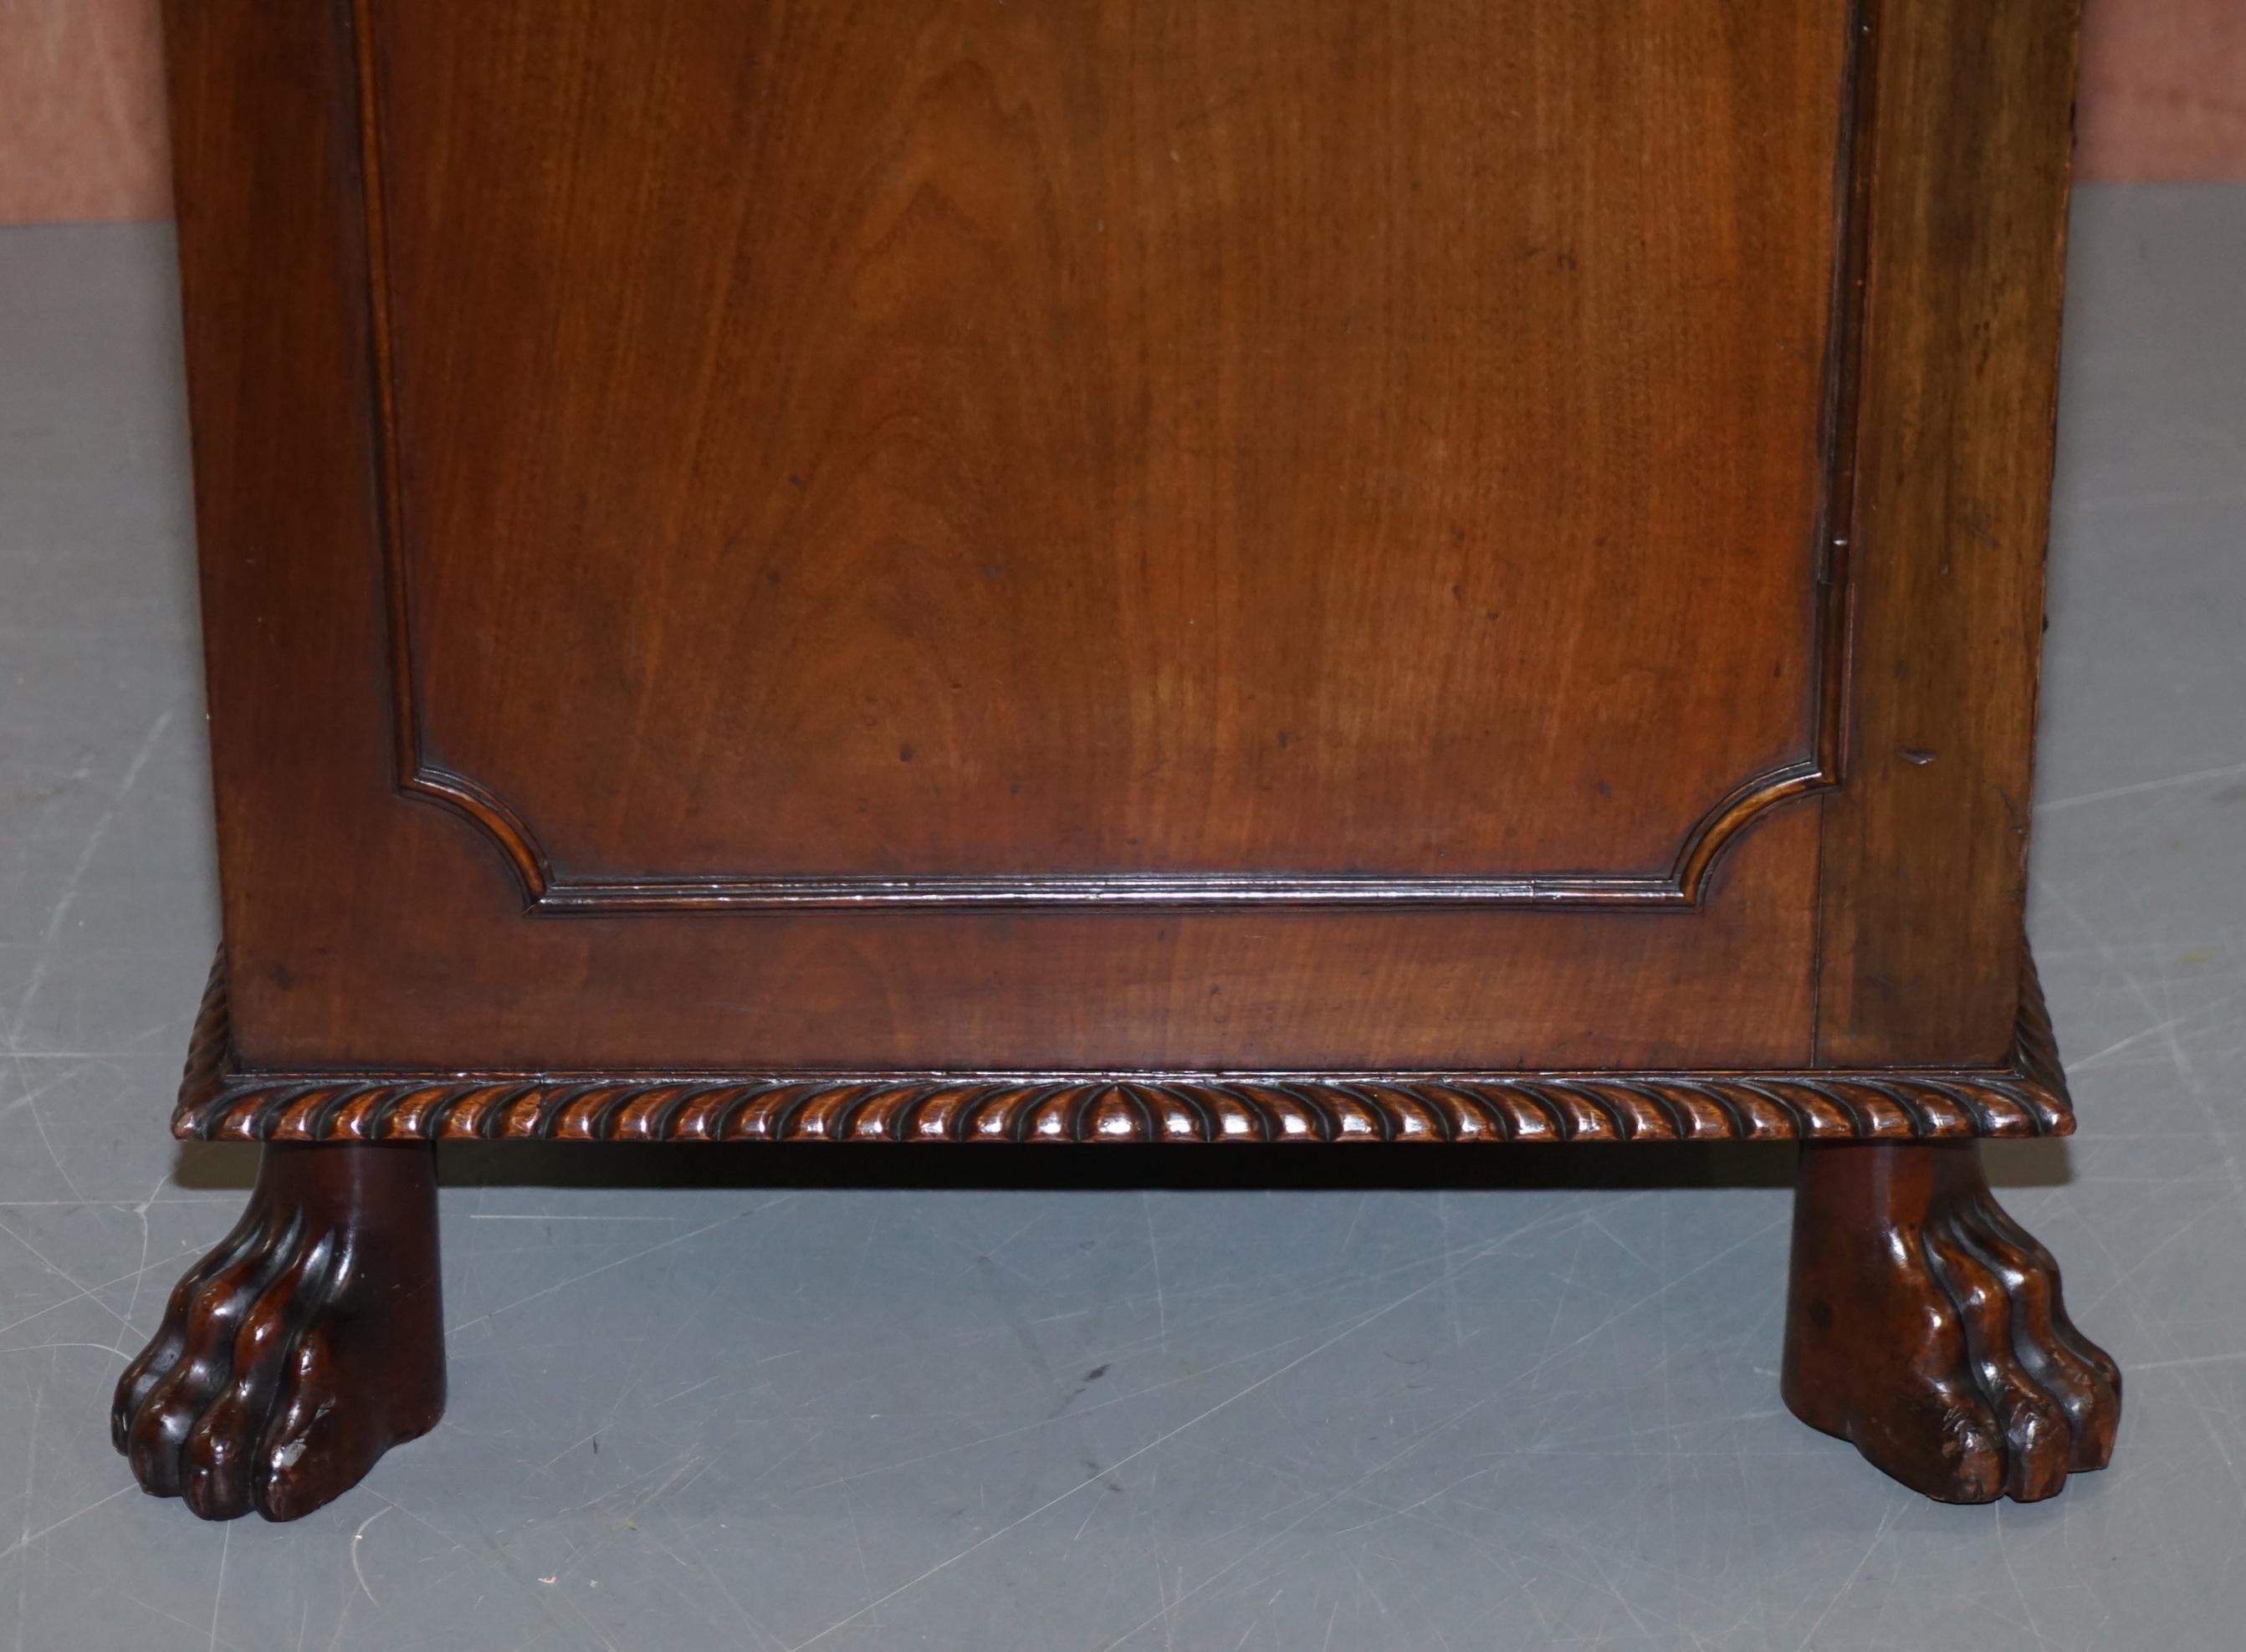 Sublime Hand Carved from Top to Bottom Antique Victorian 1850 Knee Hole Desk For Sale 7